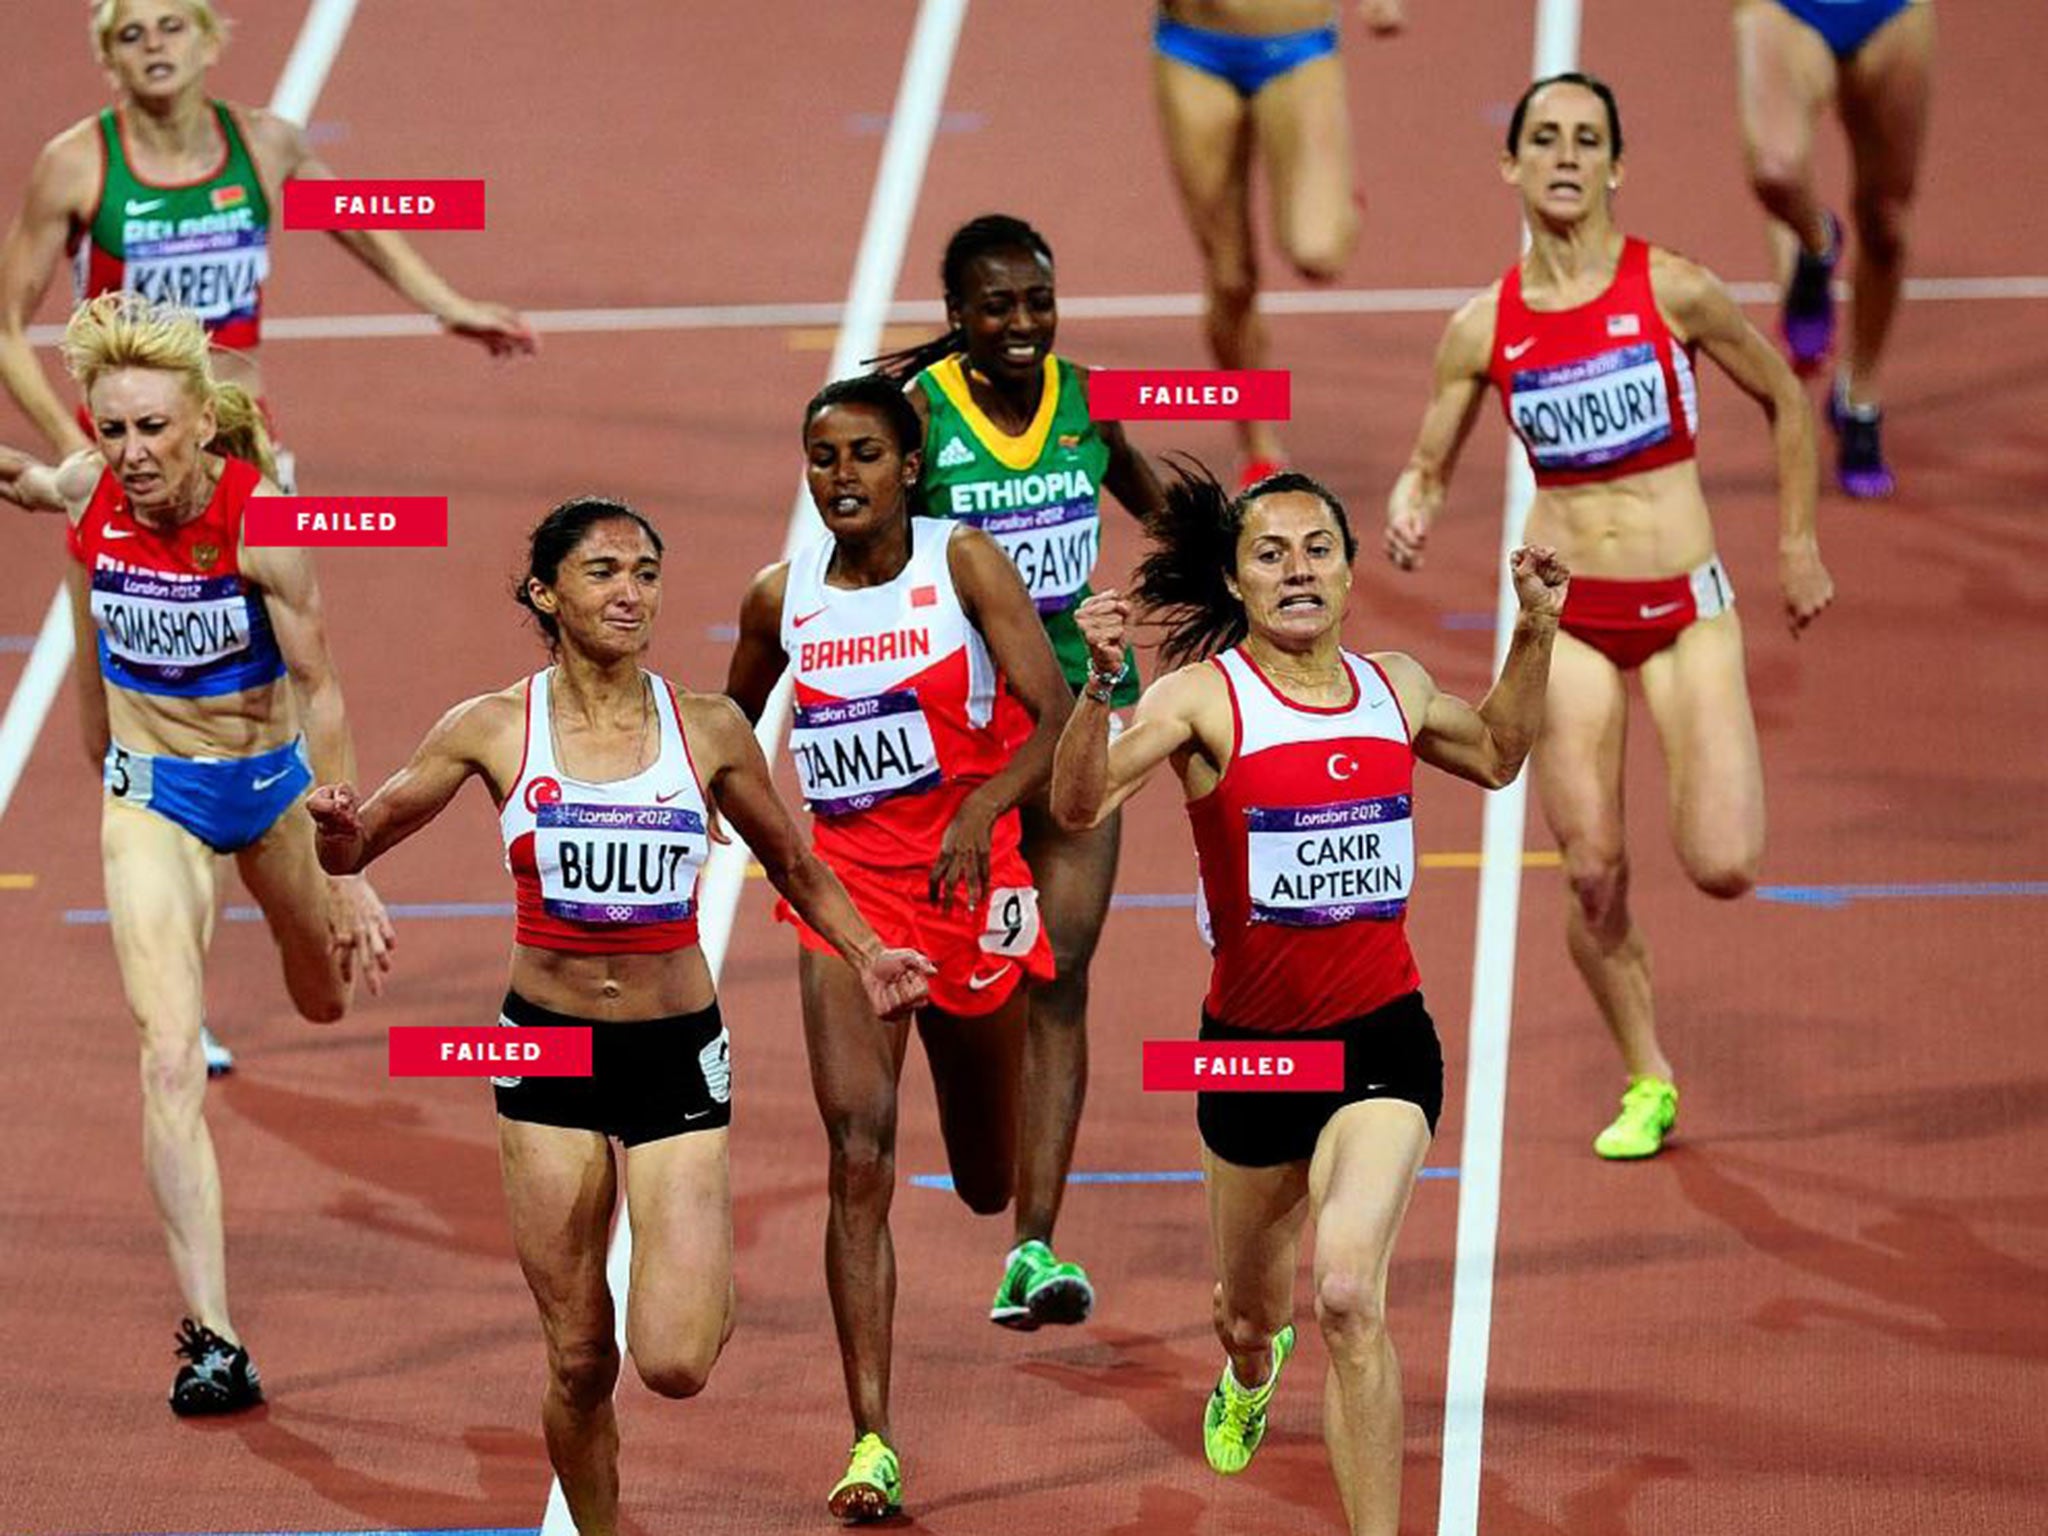 Athletics doping crisis: Was London 2012’s 1500m Olympic final the